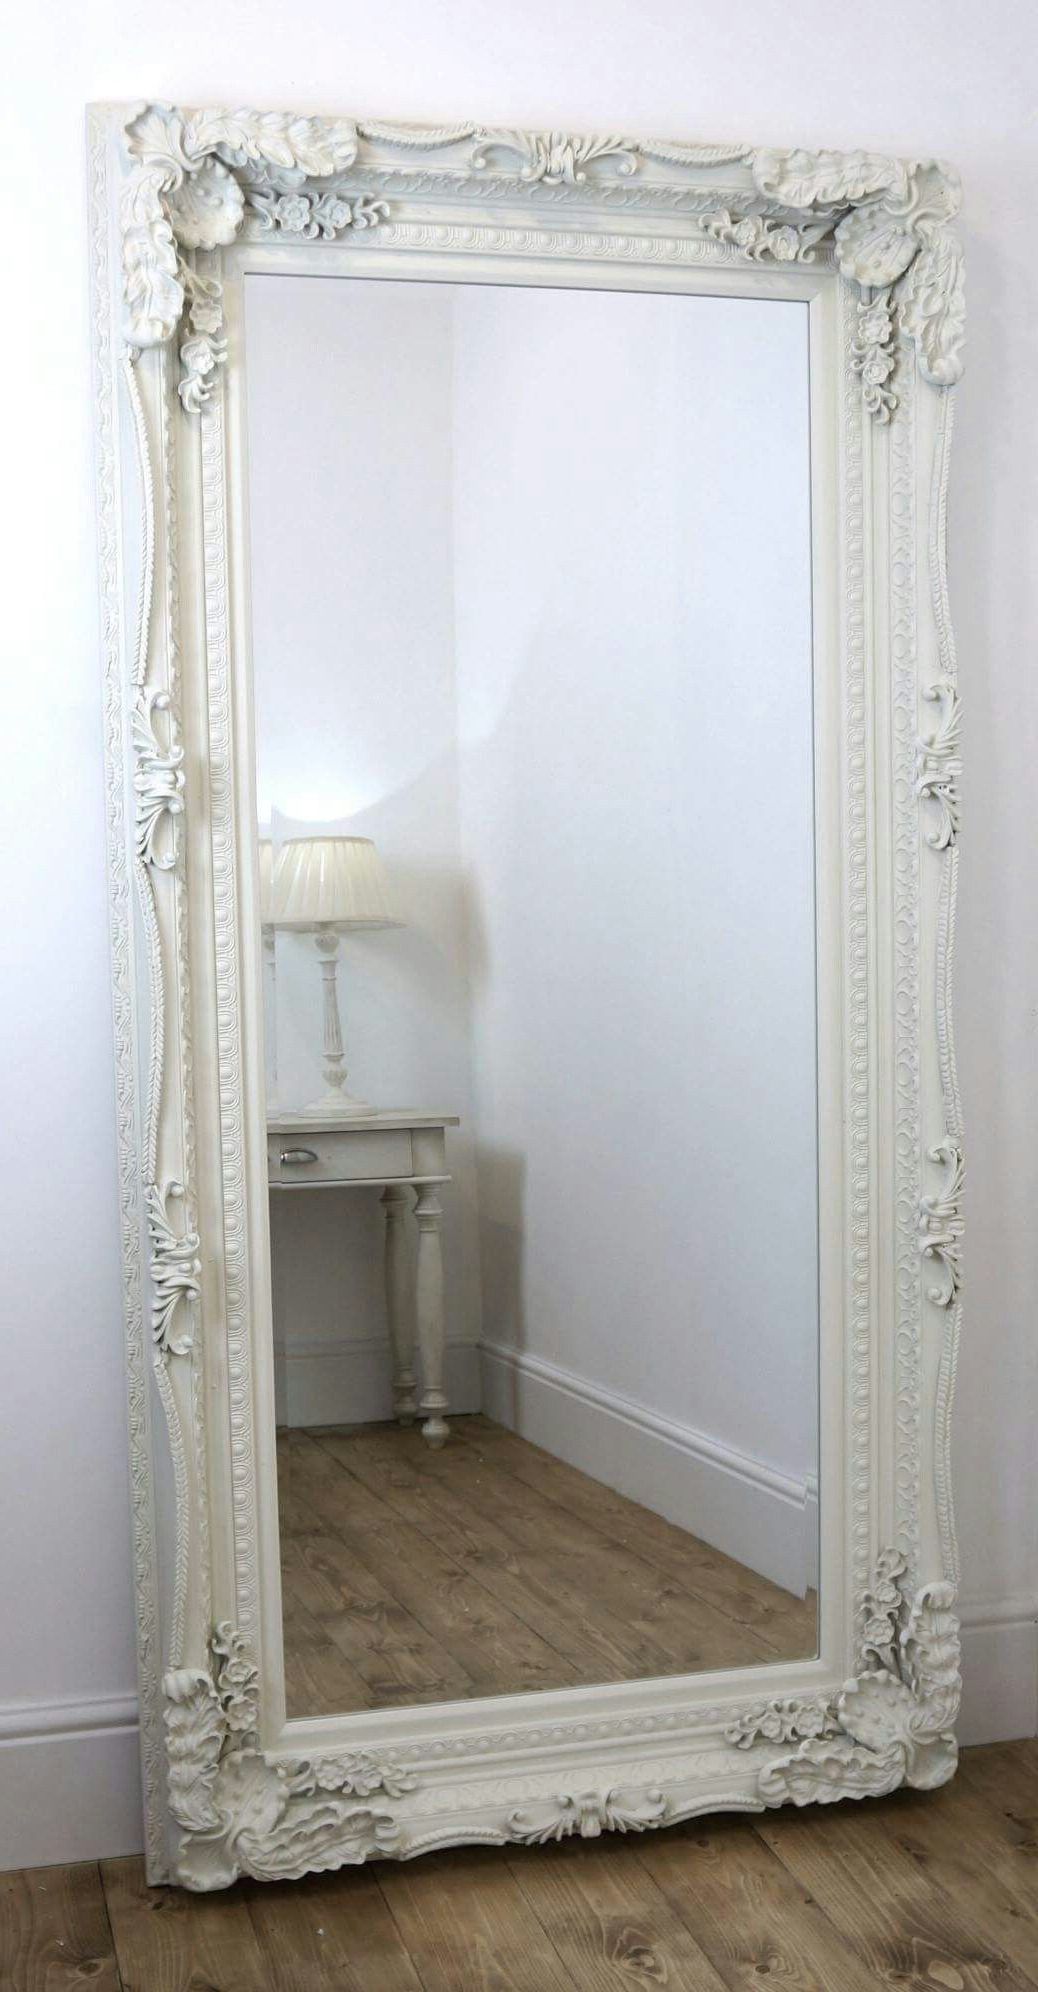 French Bedroom Decor, White Ornate Mirror, Large With Regard To White Wood Wall Mirrors (View 1 of 15)